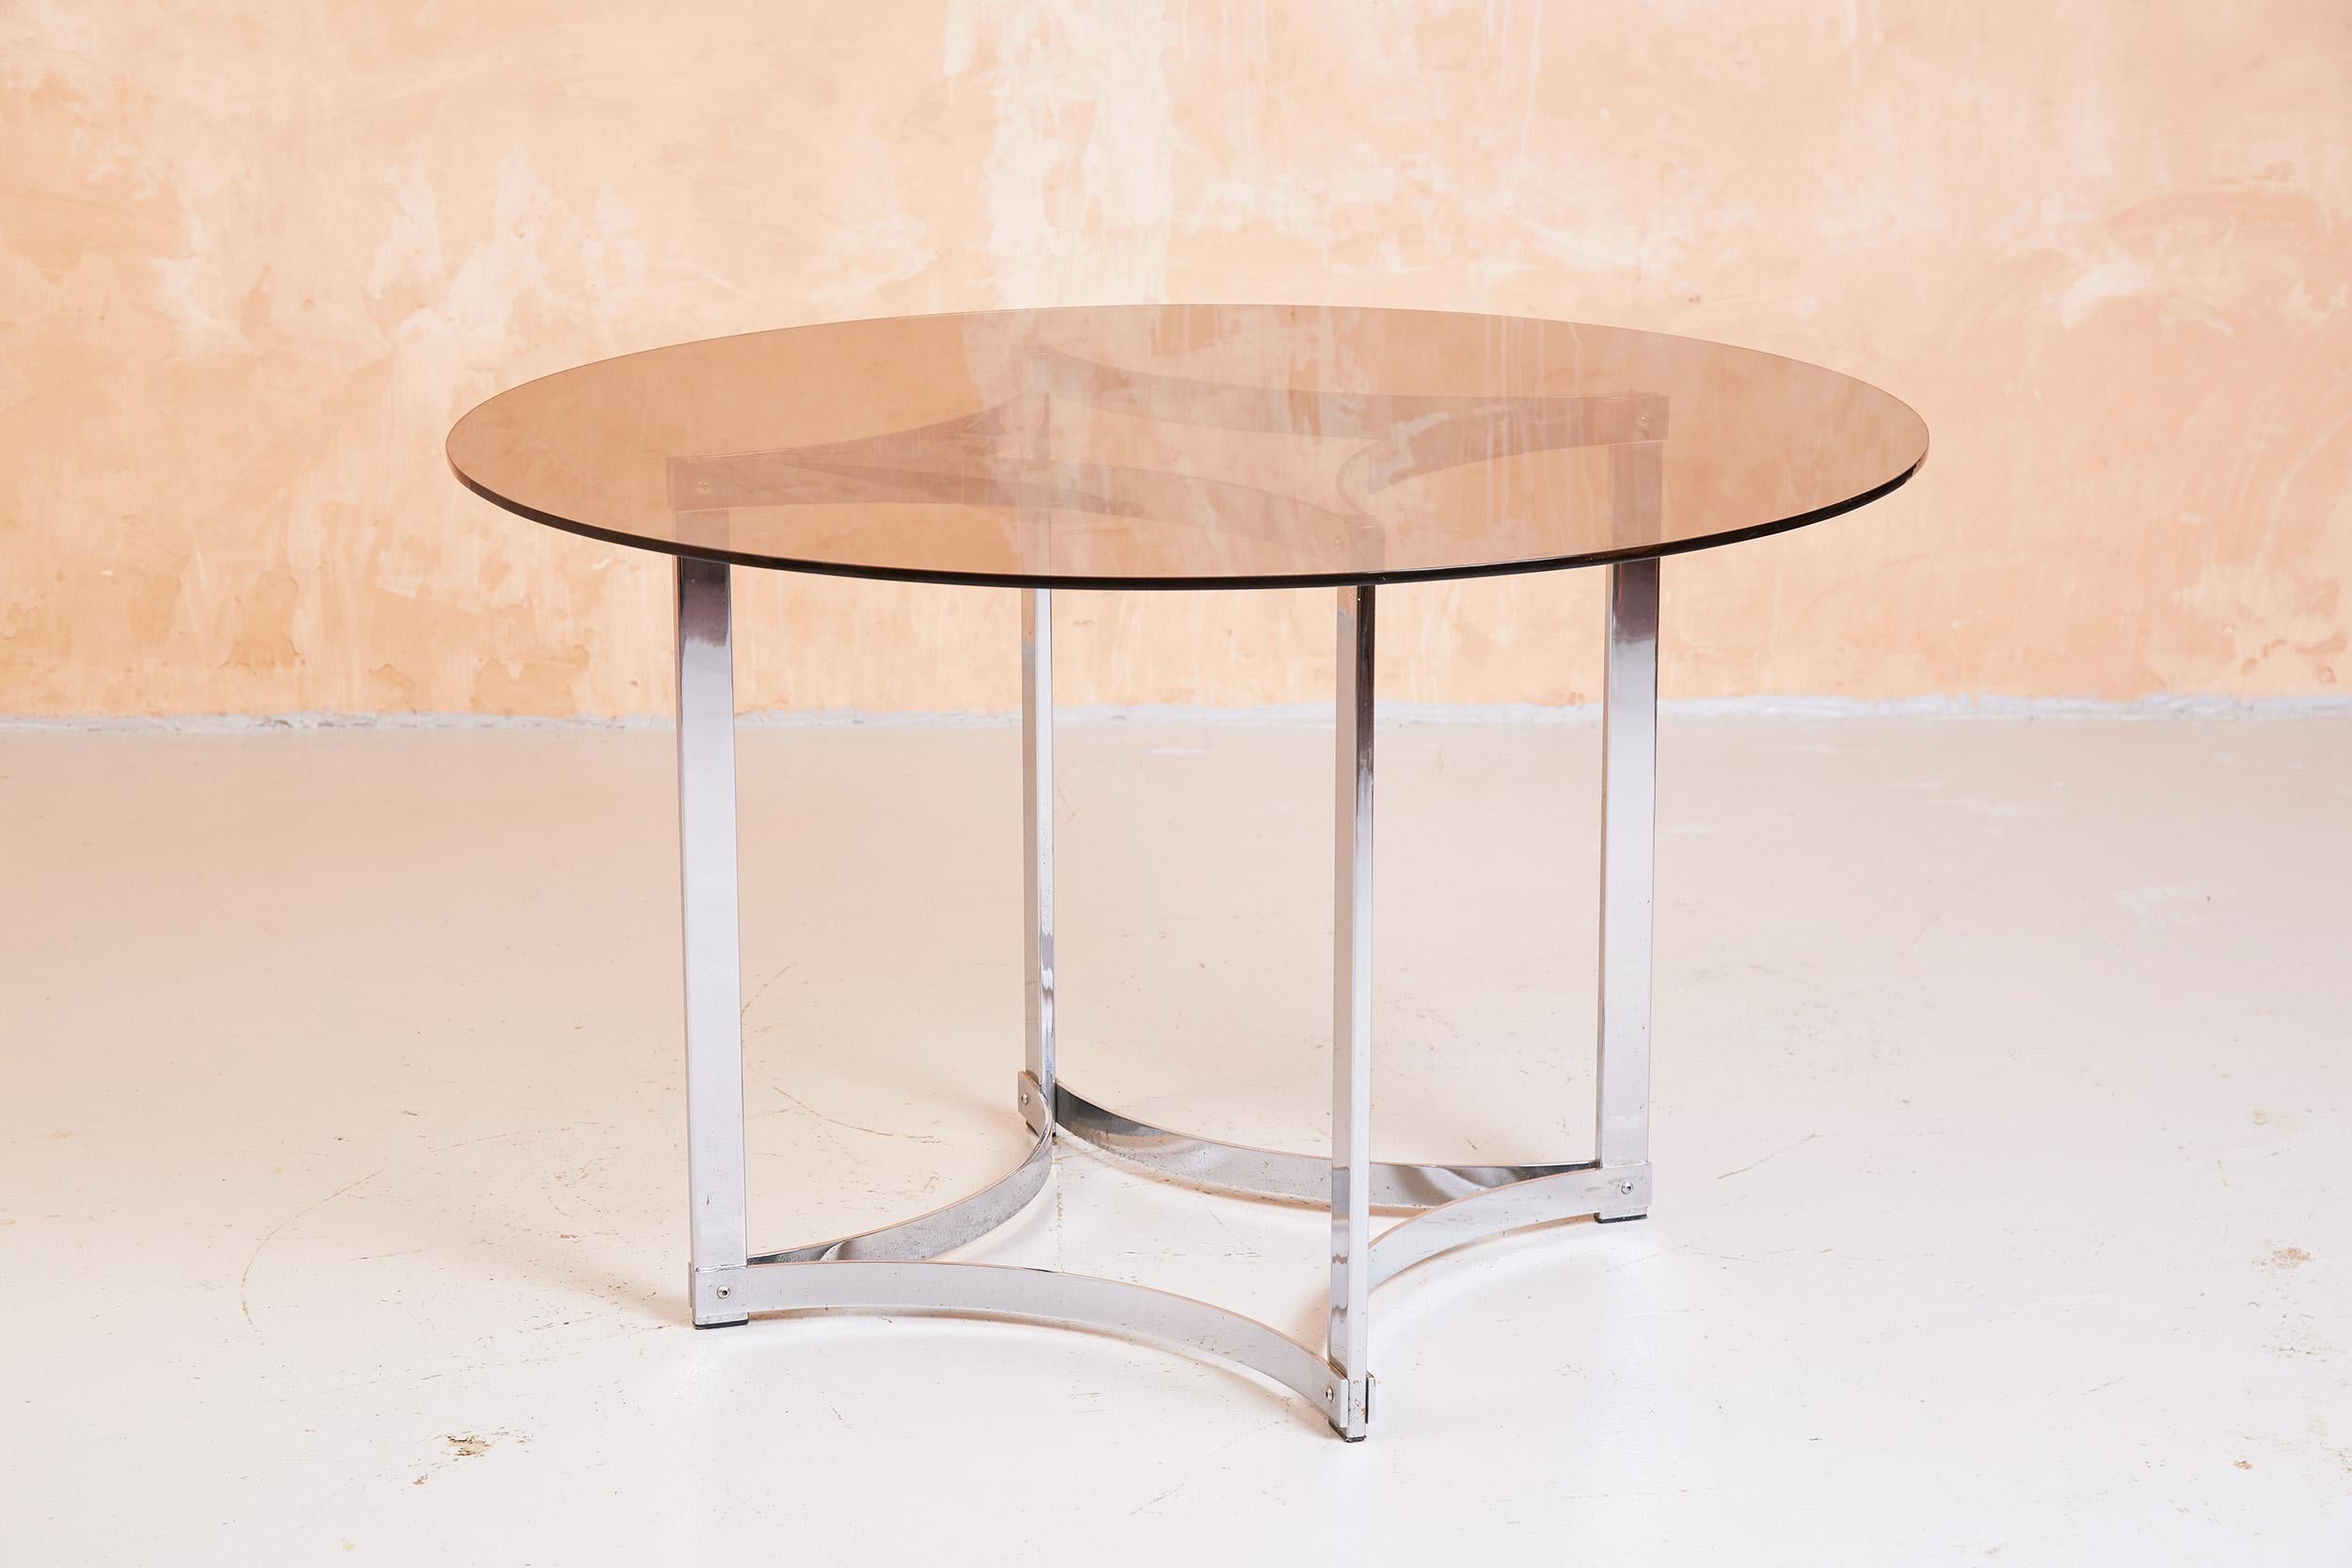 A fine example of a smoked glass and chrome dining table designed by Richard Young for Merrow Associates.

Merrow Associates was a prestige brand originally sold at Harrods and Heals, and now a sought after antique.

We also have another